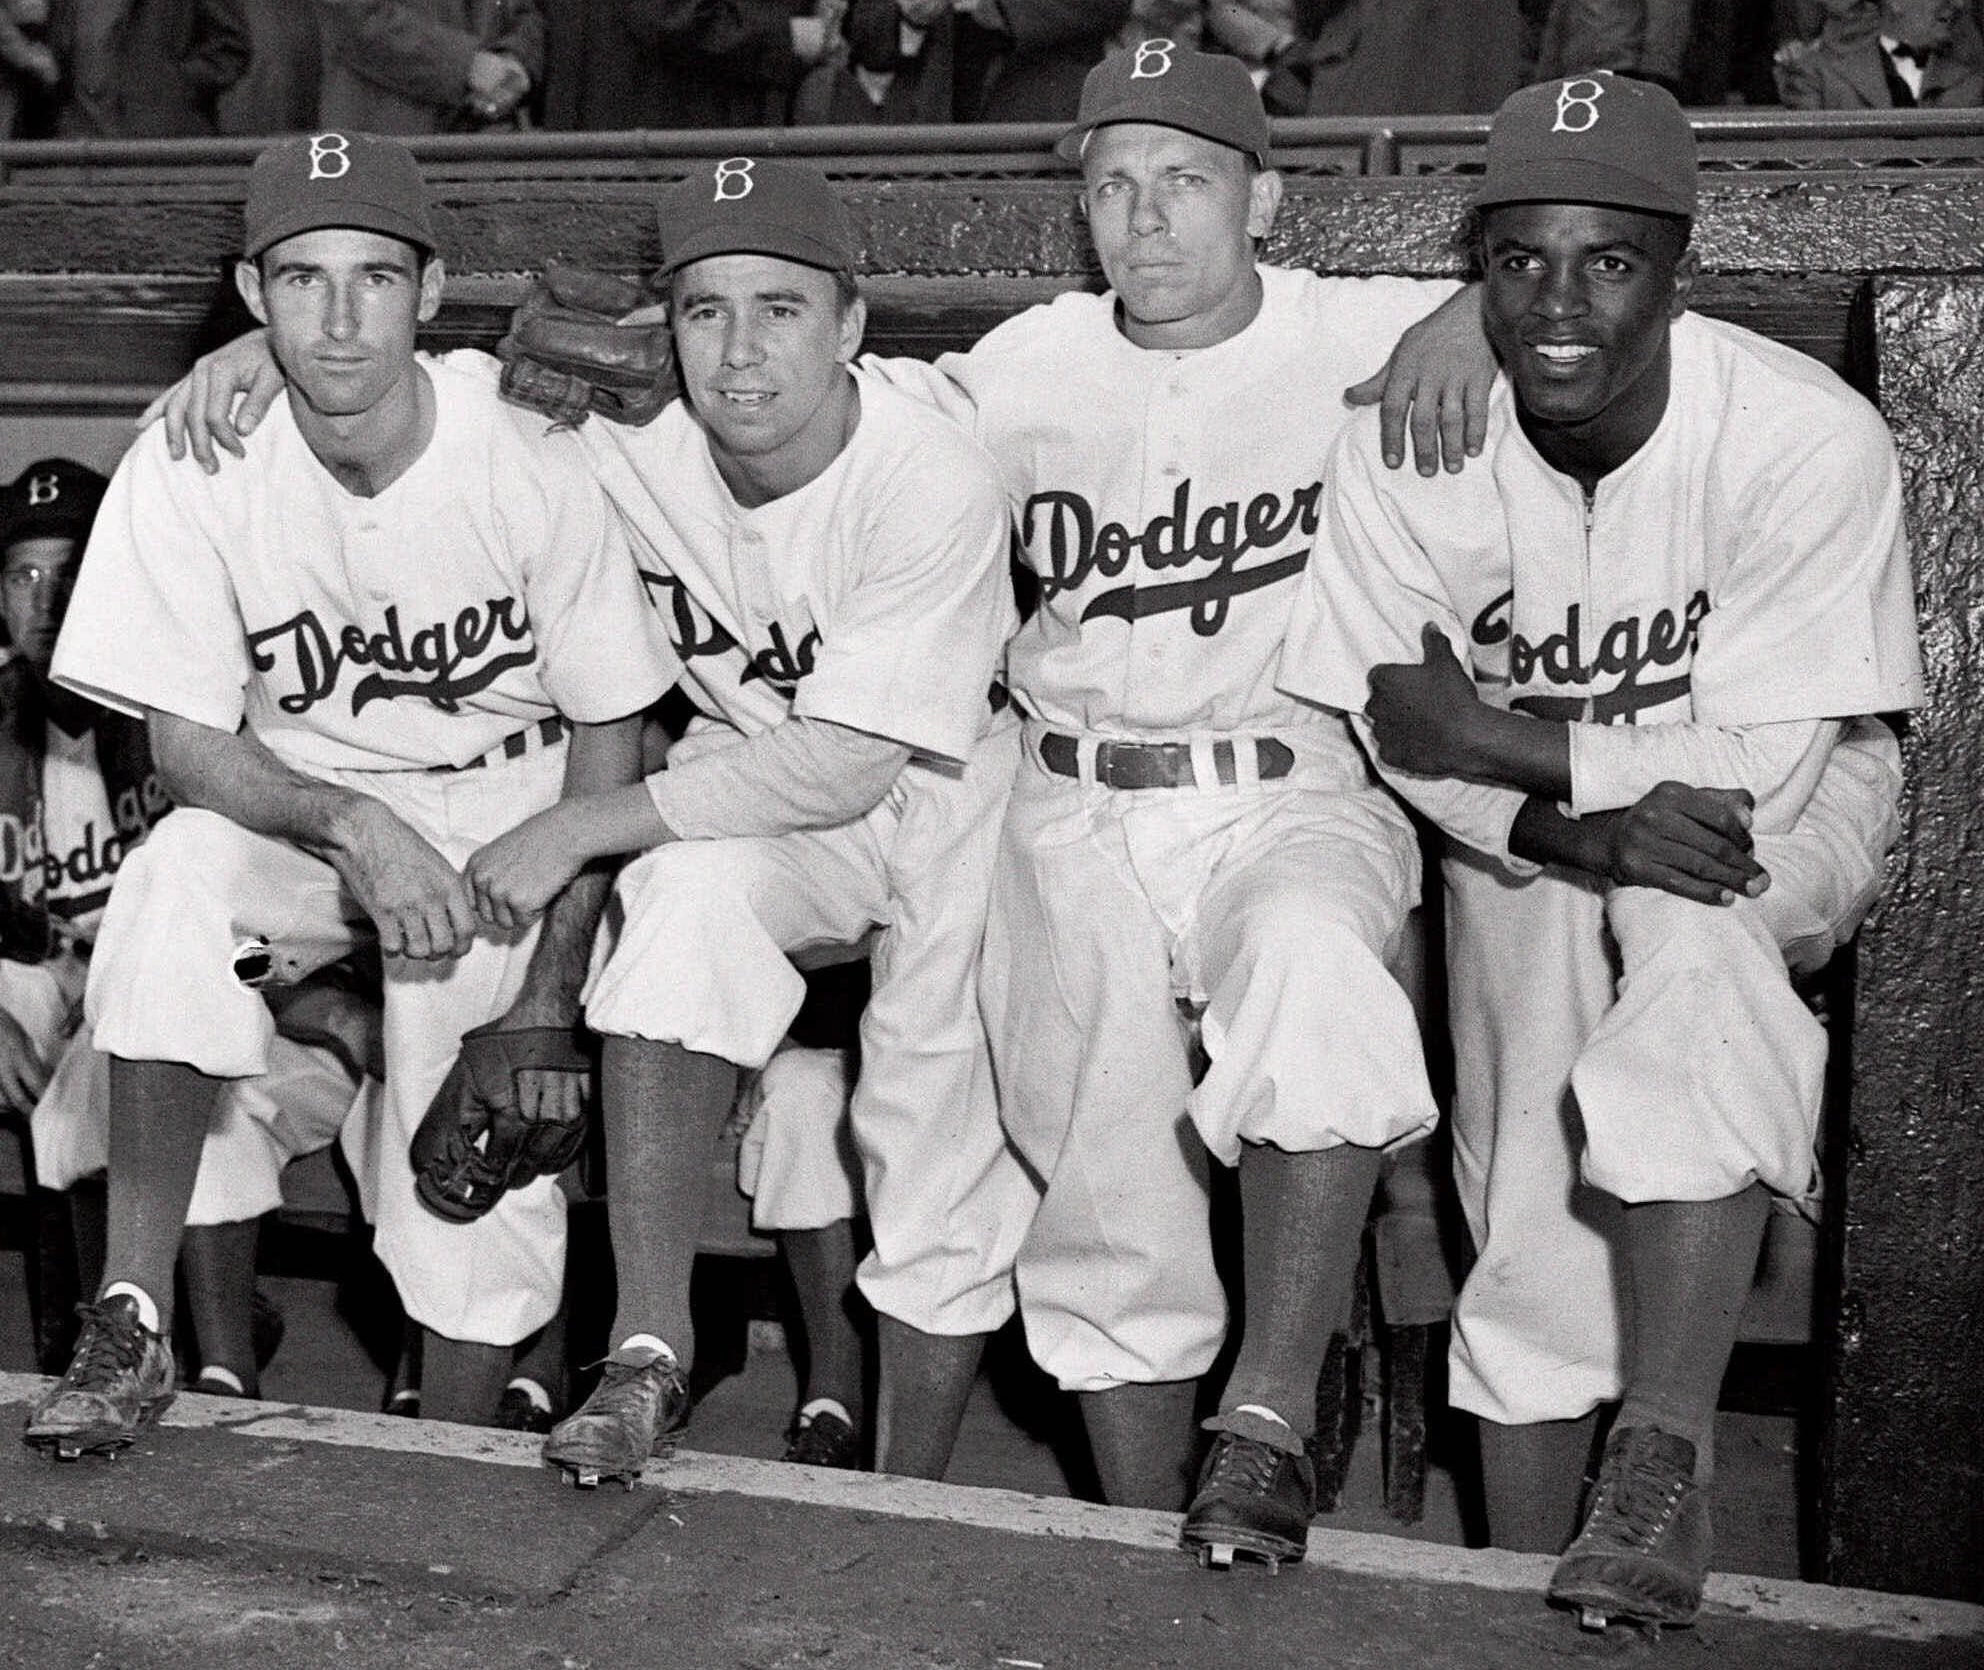 42' shows why Jackie Robinson still matters